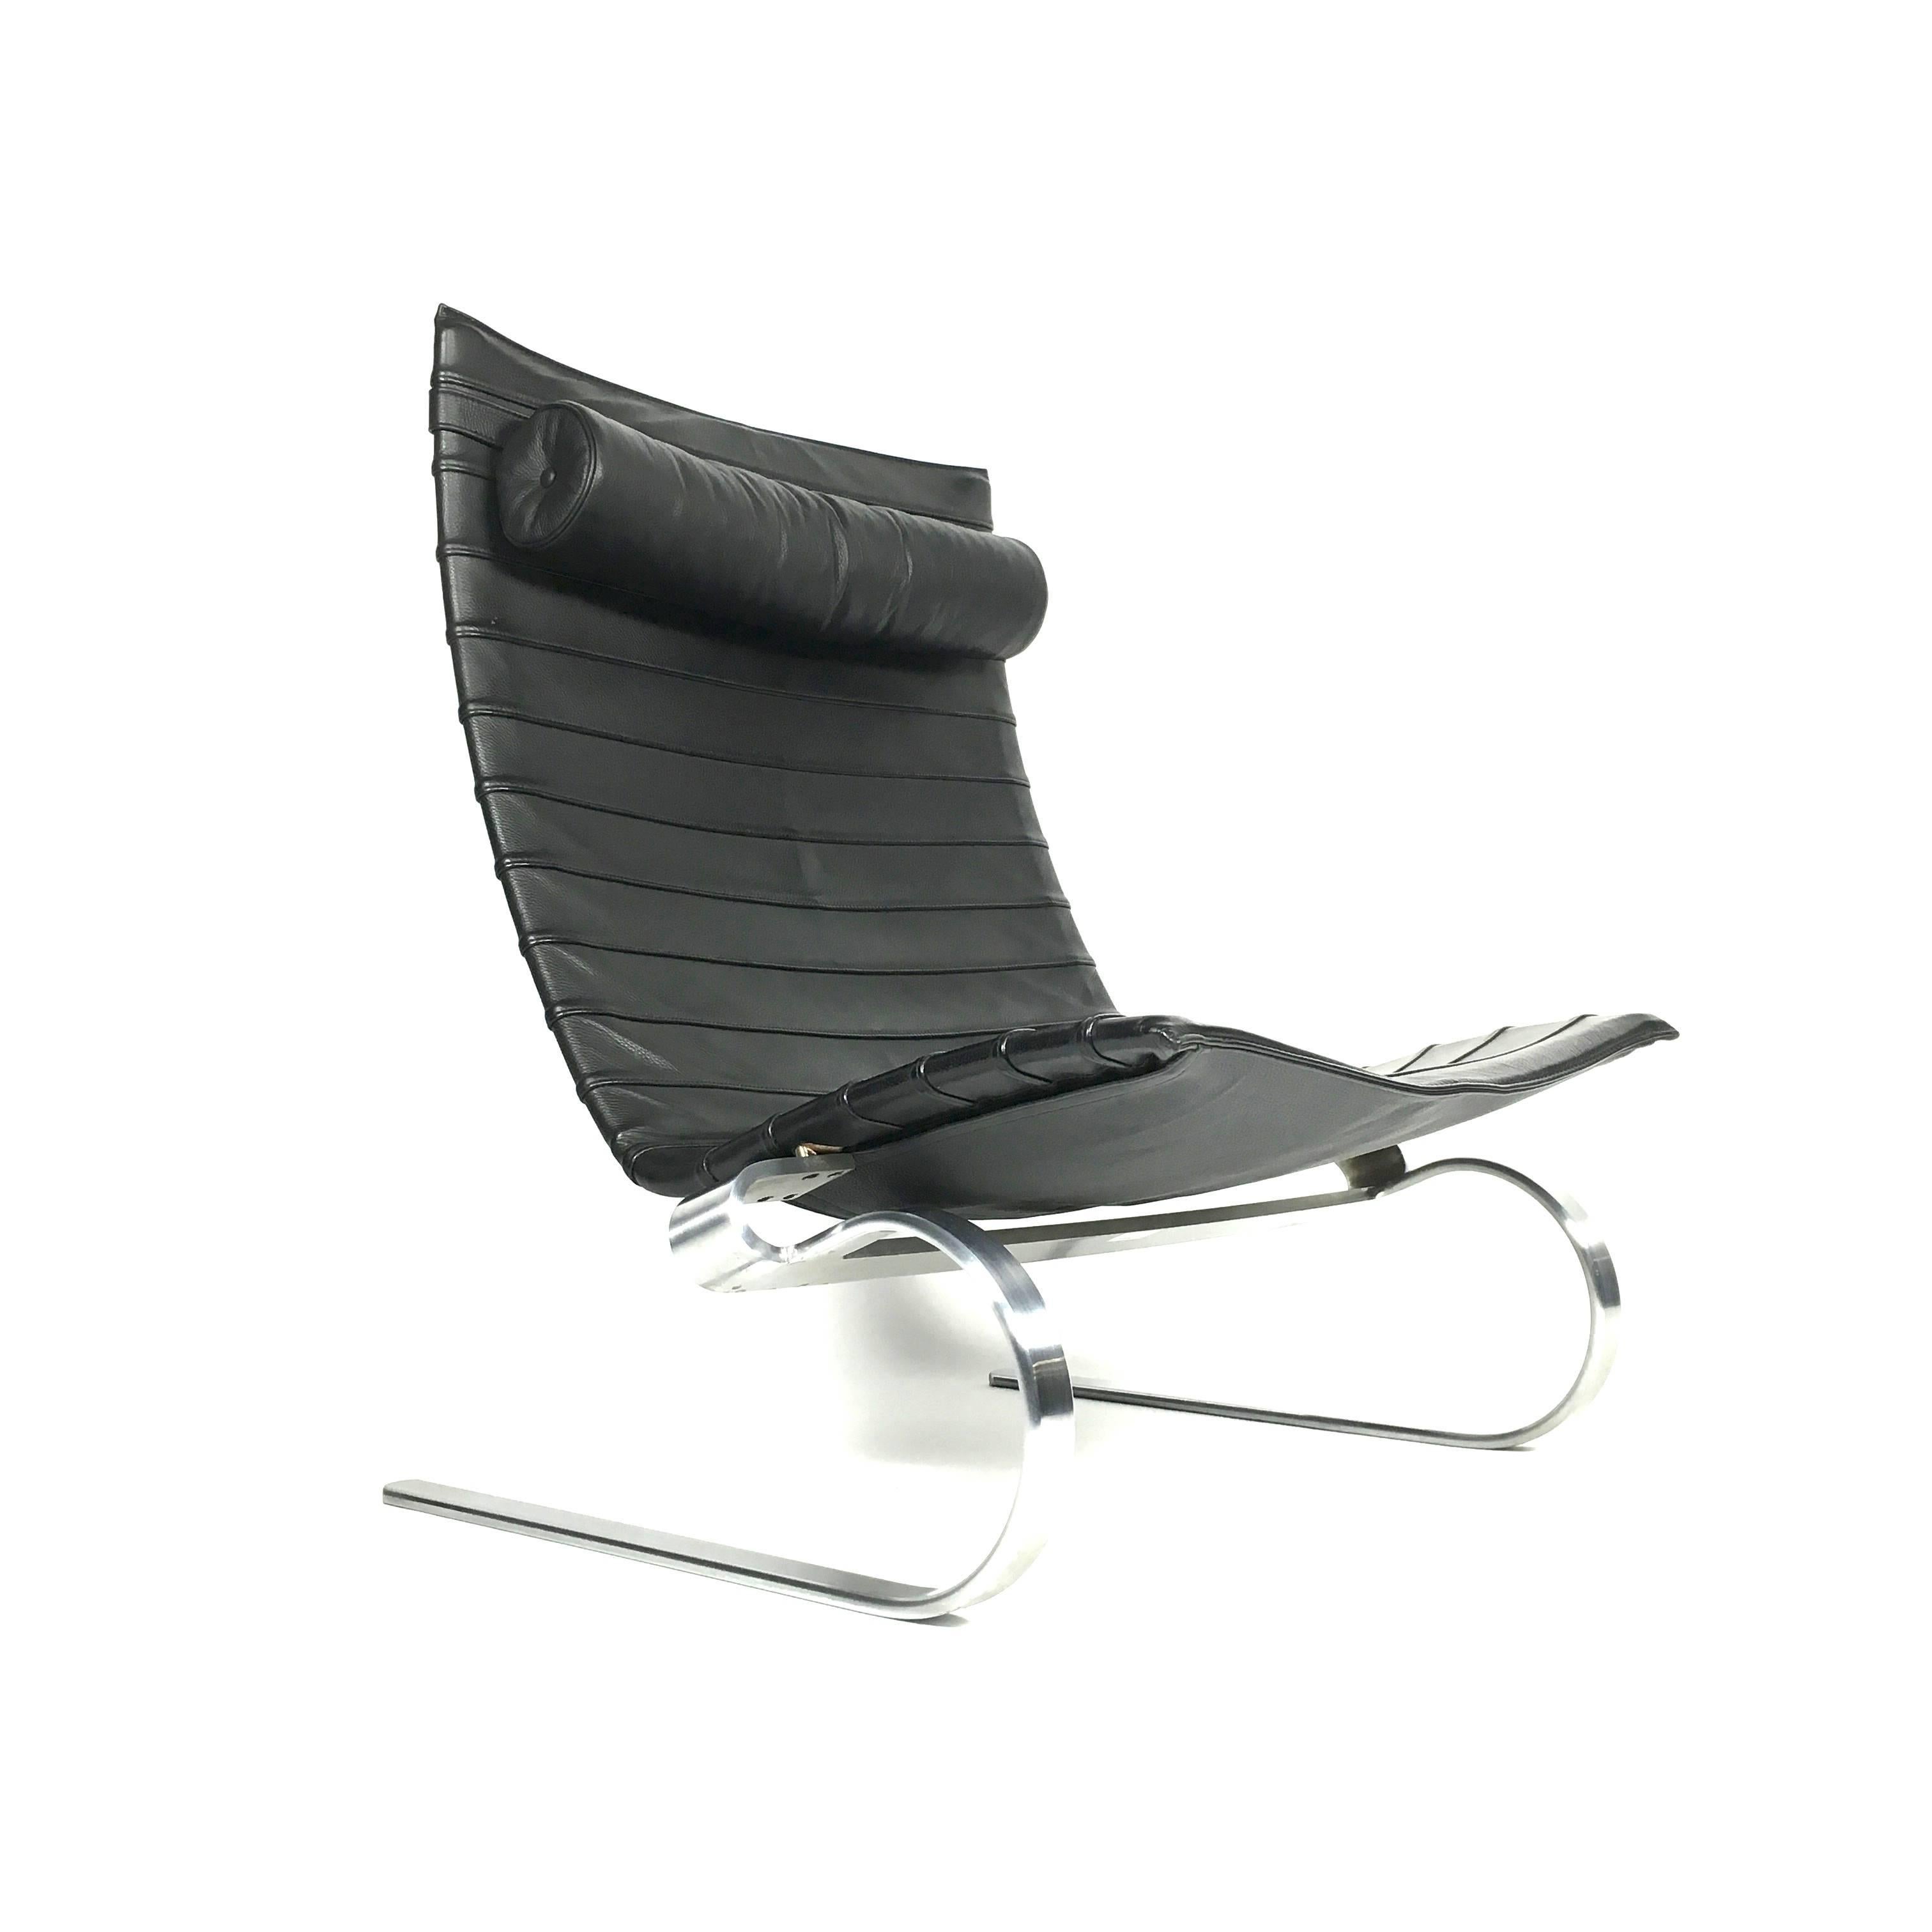 Pair of PK20 Black Leather Lounge Chairs by Poul Kjaerholm, Denmark 1